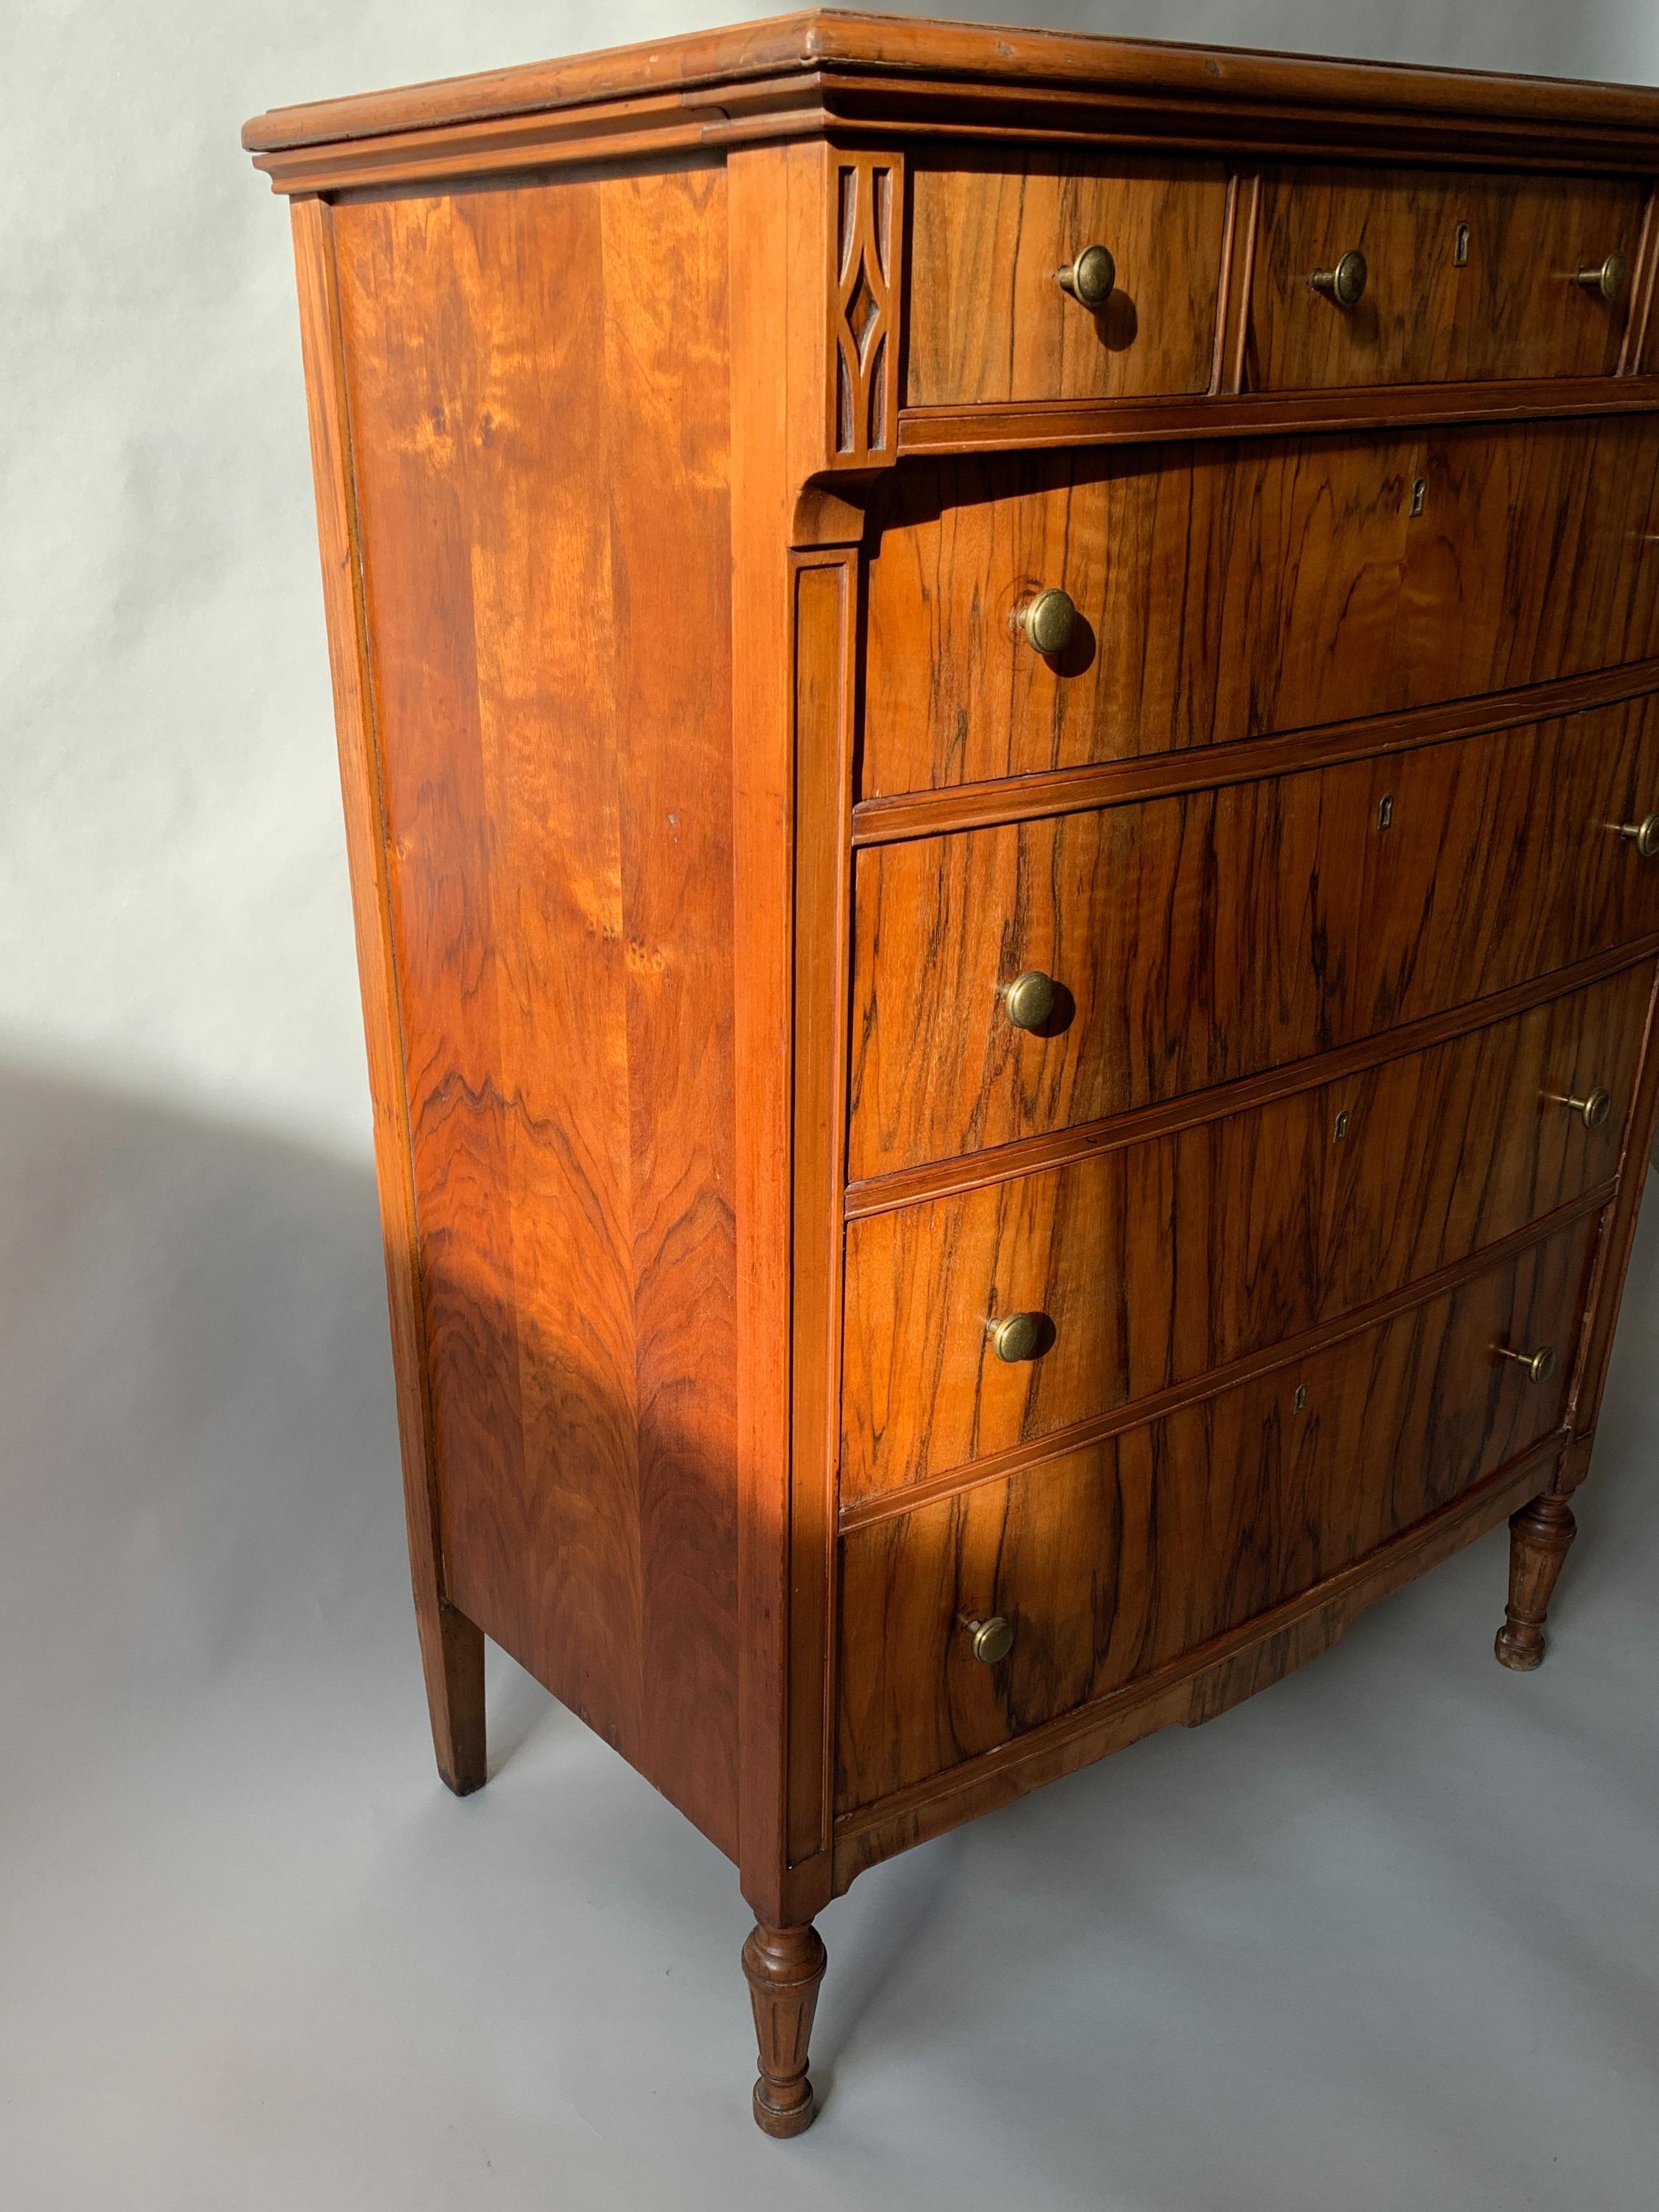 1930s rosewood 7-drawer English dresser with brass knob and keyhole details. Carved wood detailing on corners, tapered legs and a beautiful veneer. Sturdy.